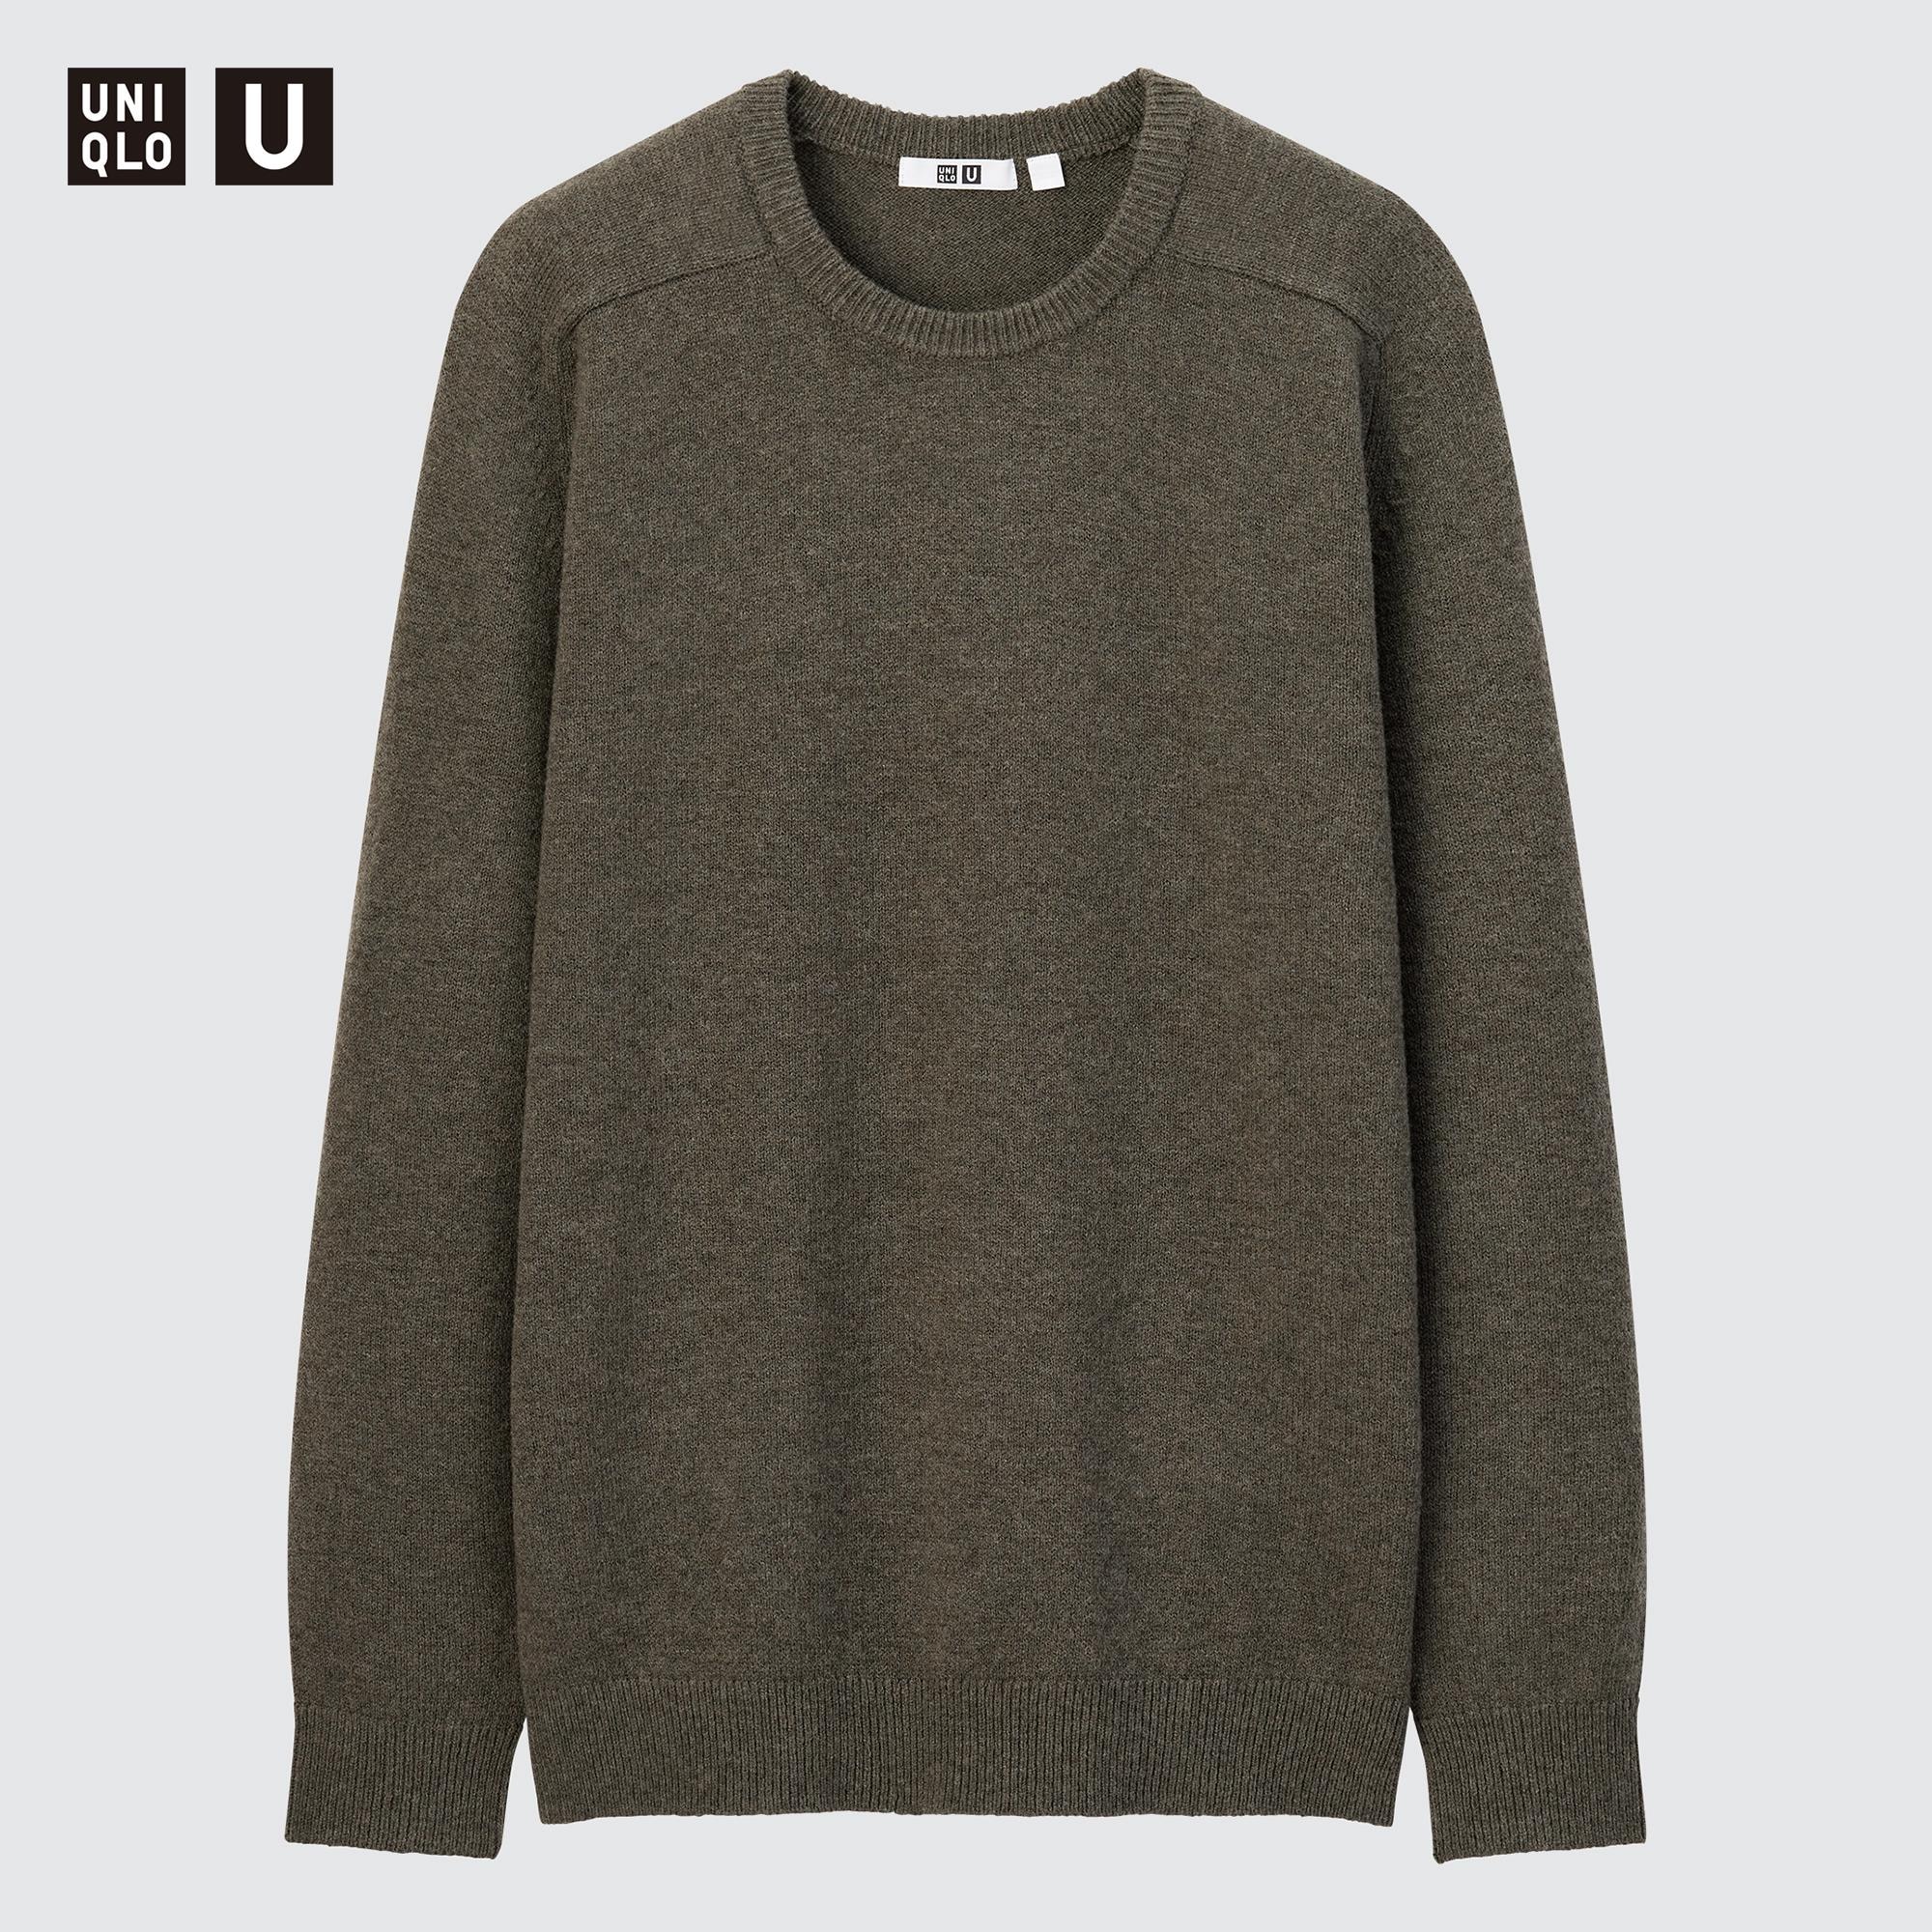 Dhanis New Uniqlo Sweatshirt Has the Ideal Weight and Shape  Fashionista